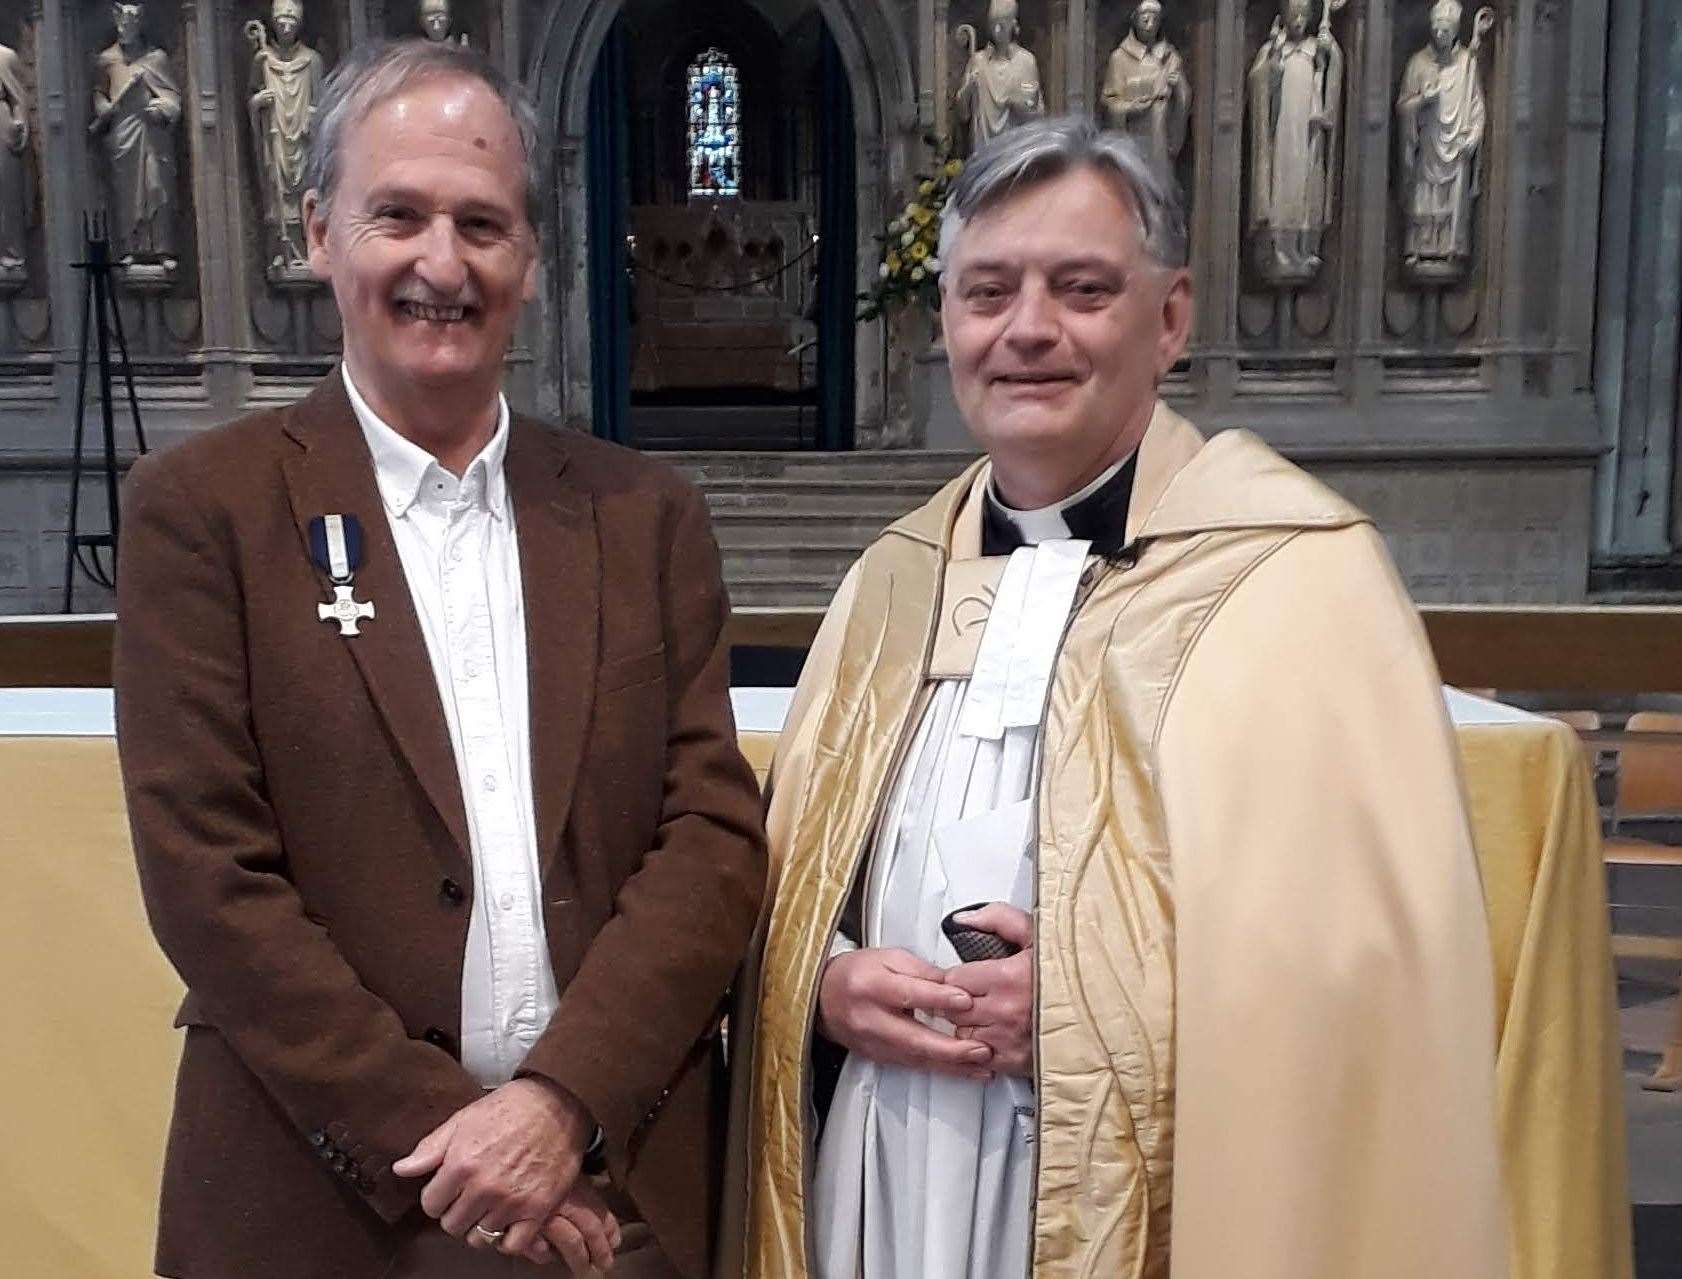 Alan Cook, grandson of Medway Queen commanding officer Capt Alfred Cook, with the Very Rev Dr Philip Hesketh